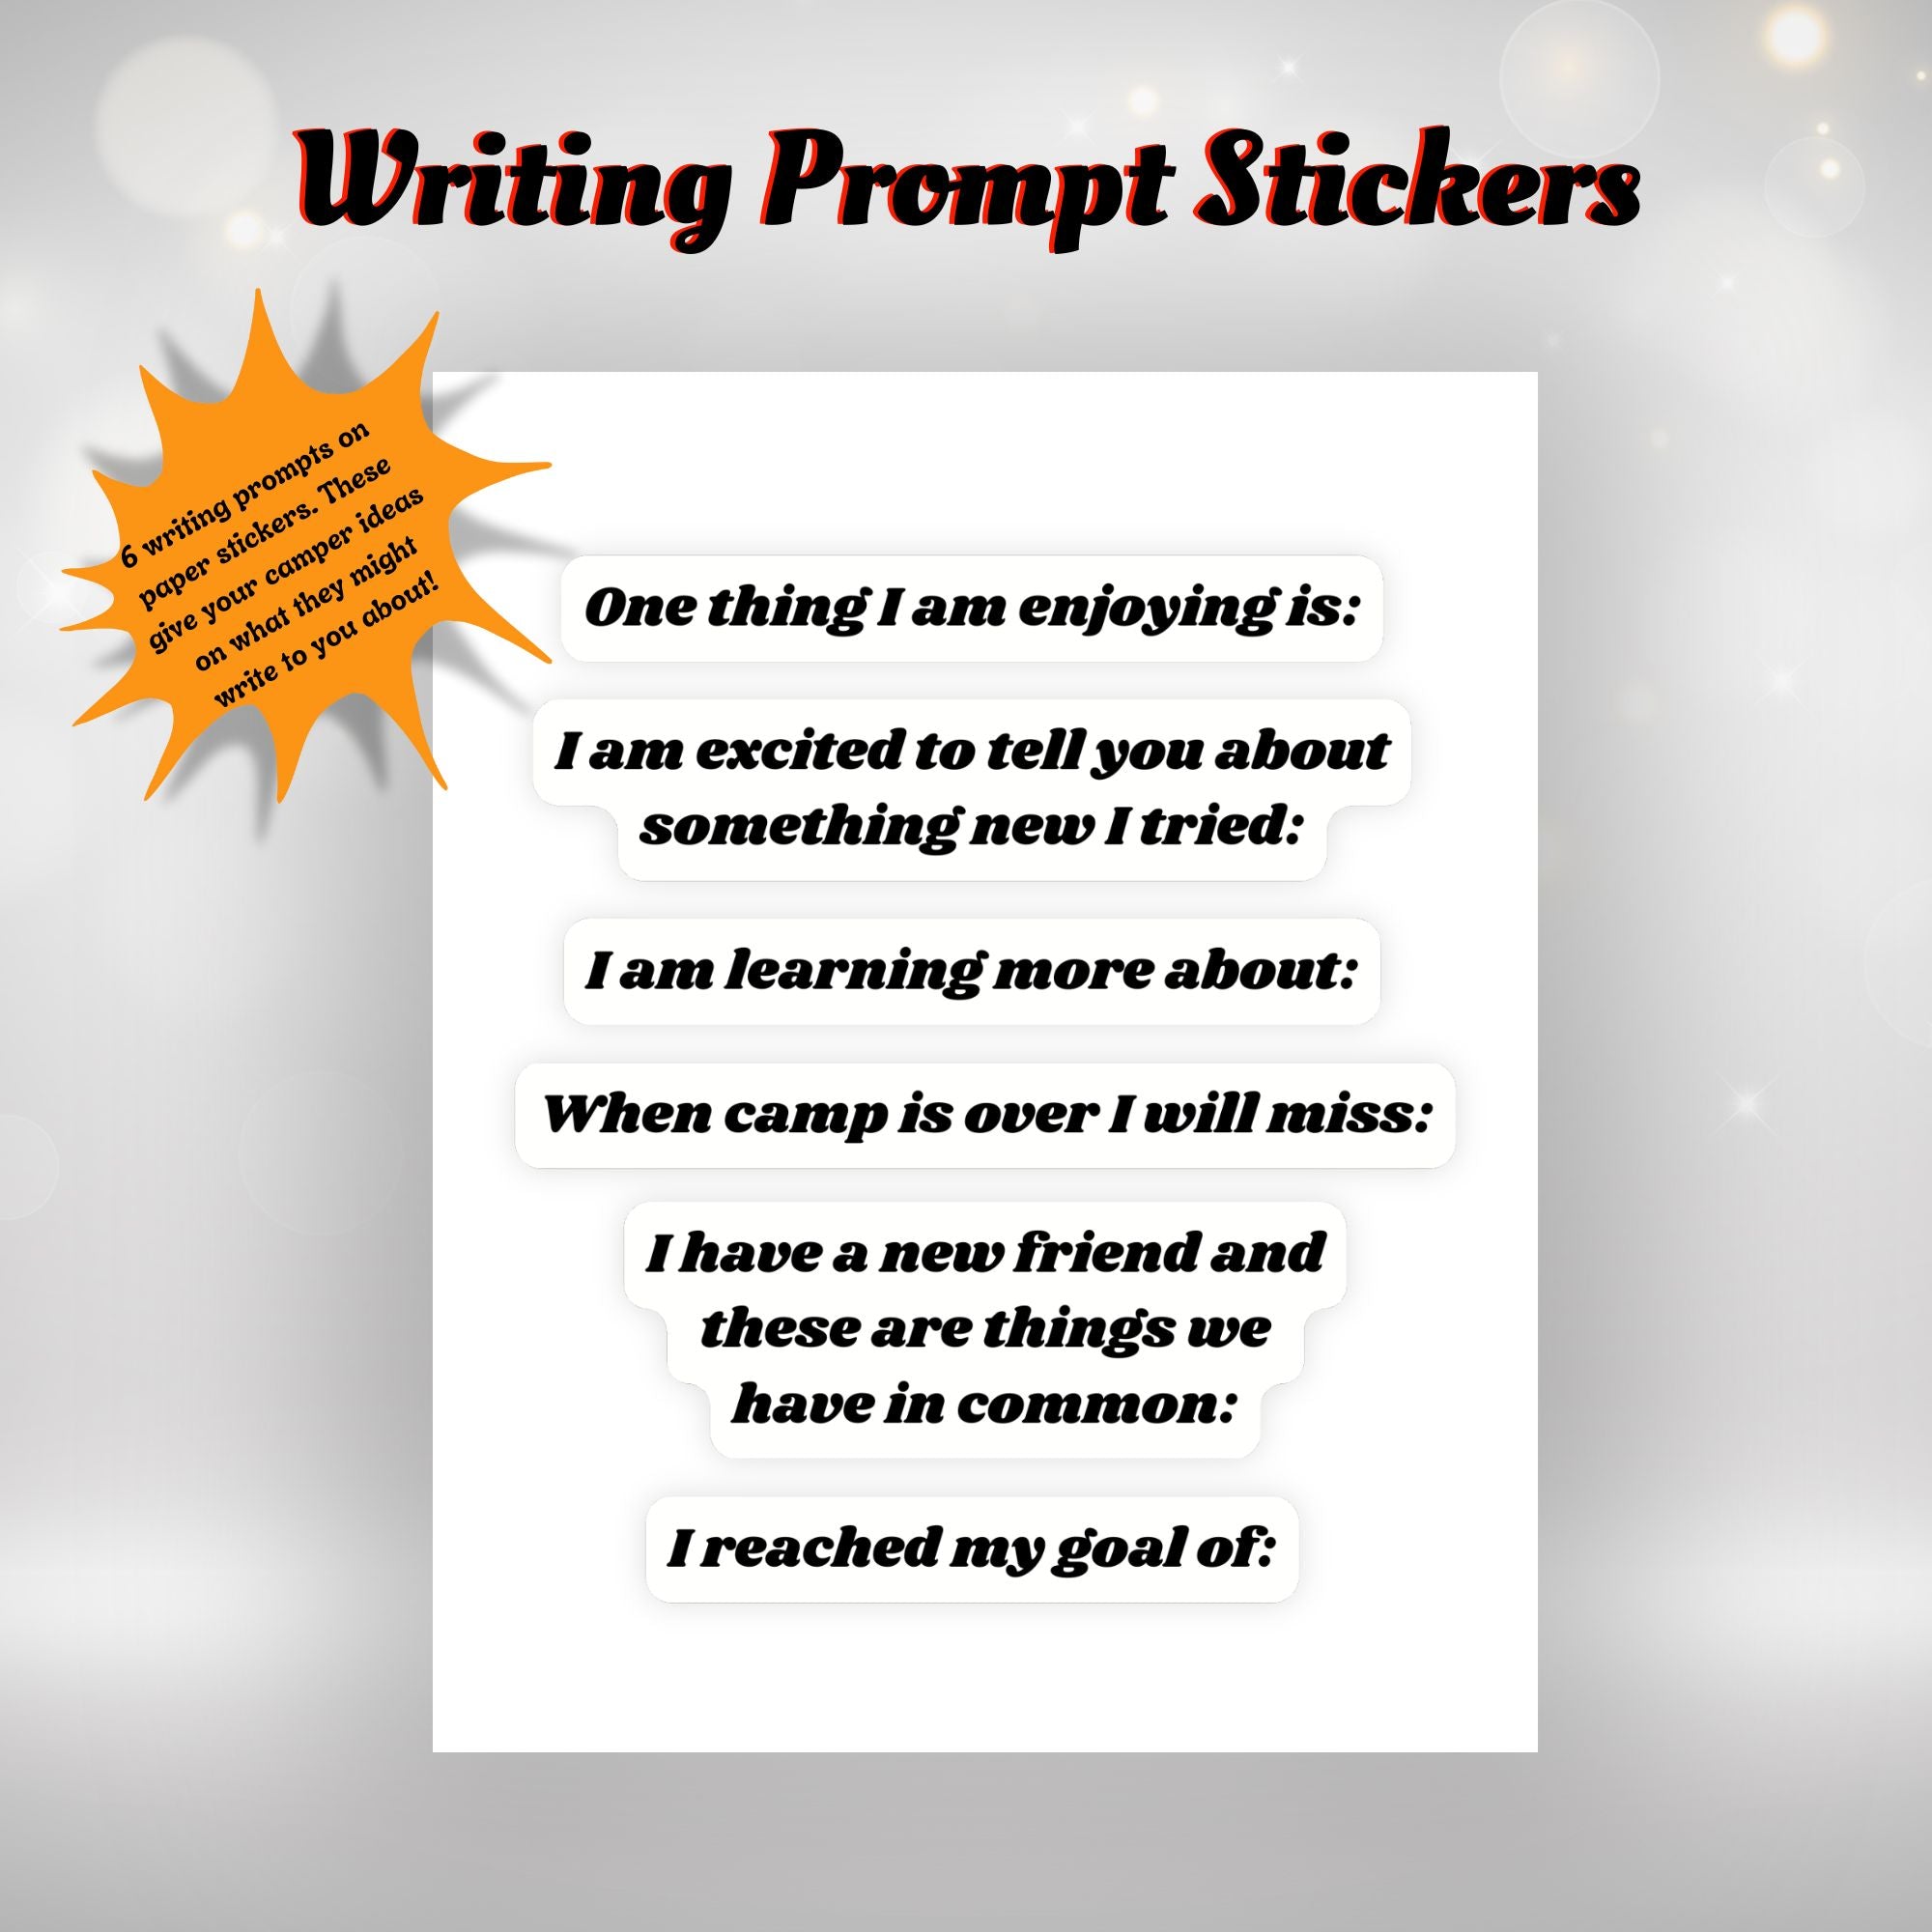 This image shows the writing prompt stickers with six different topics.